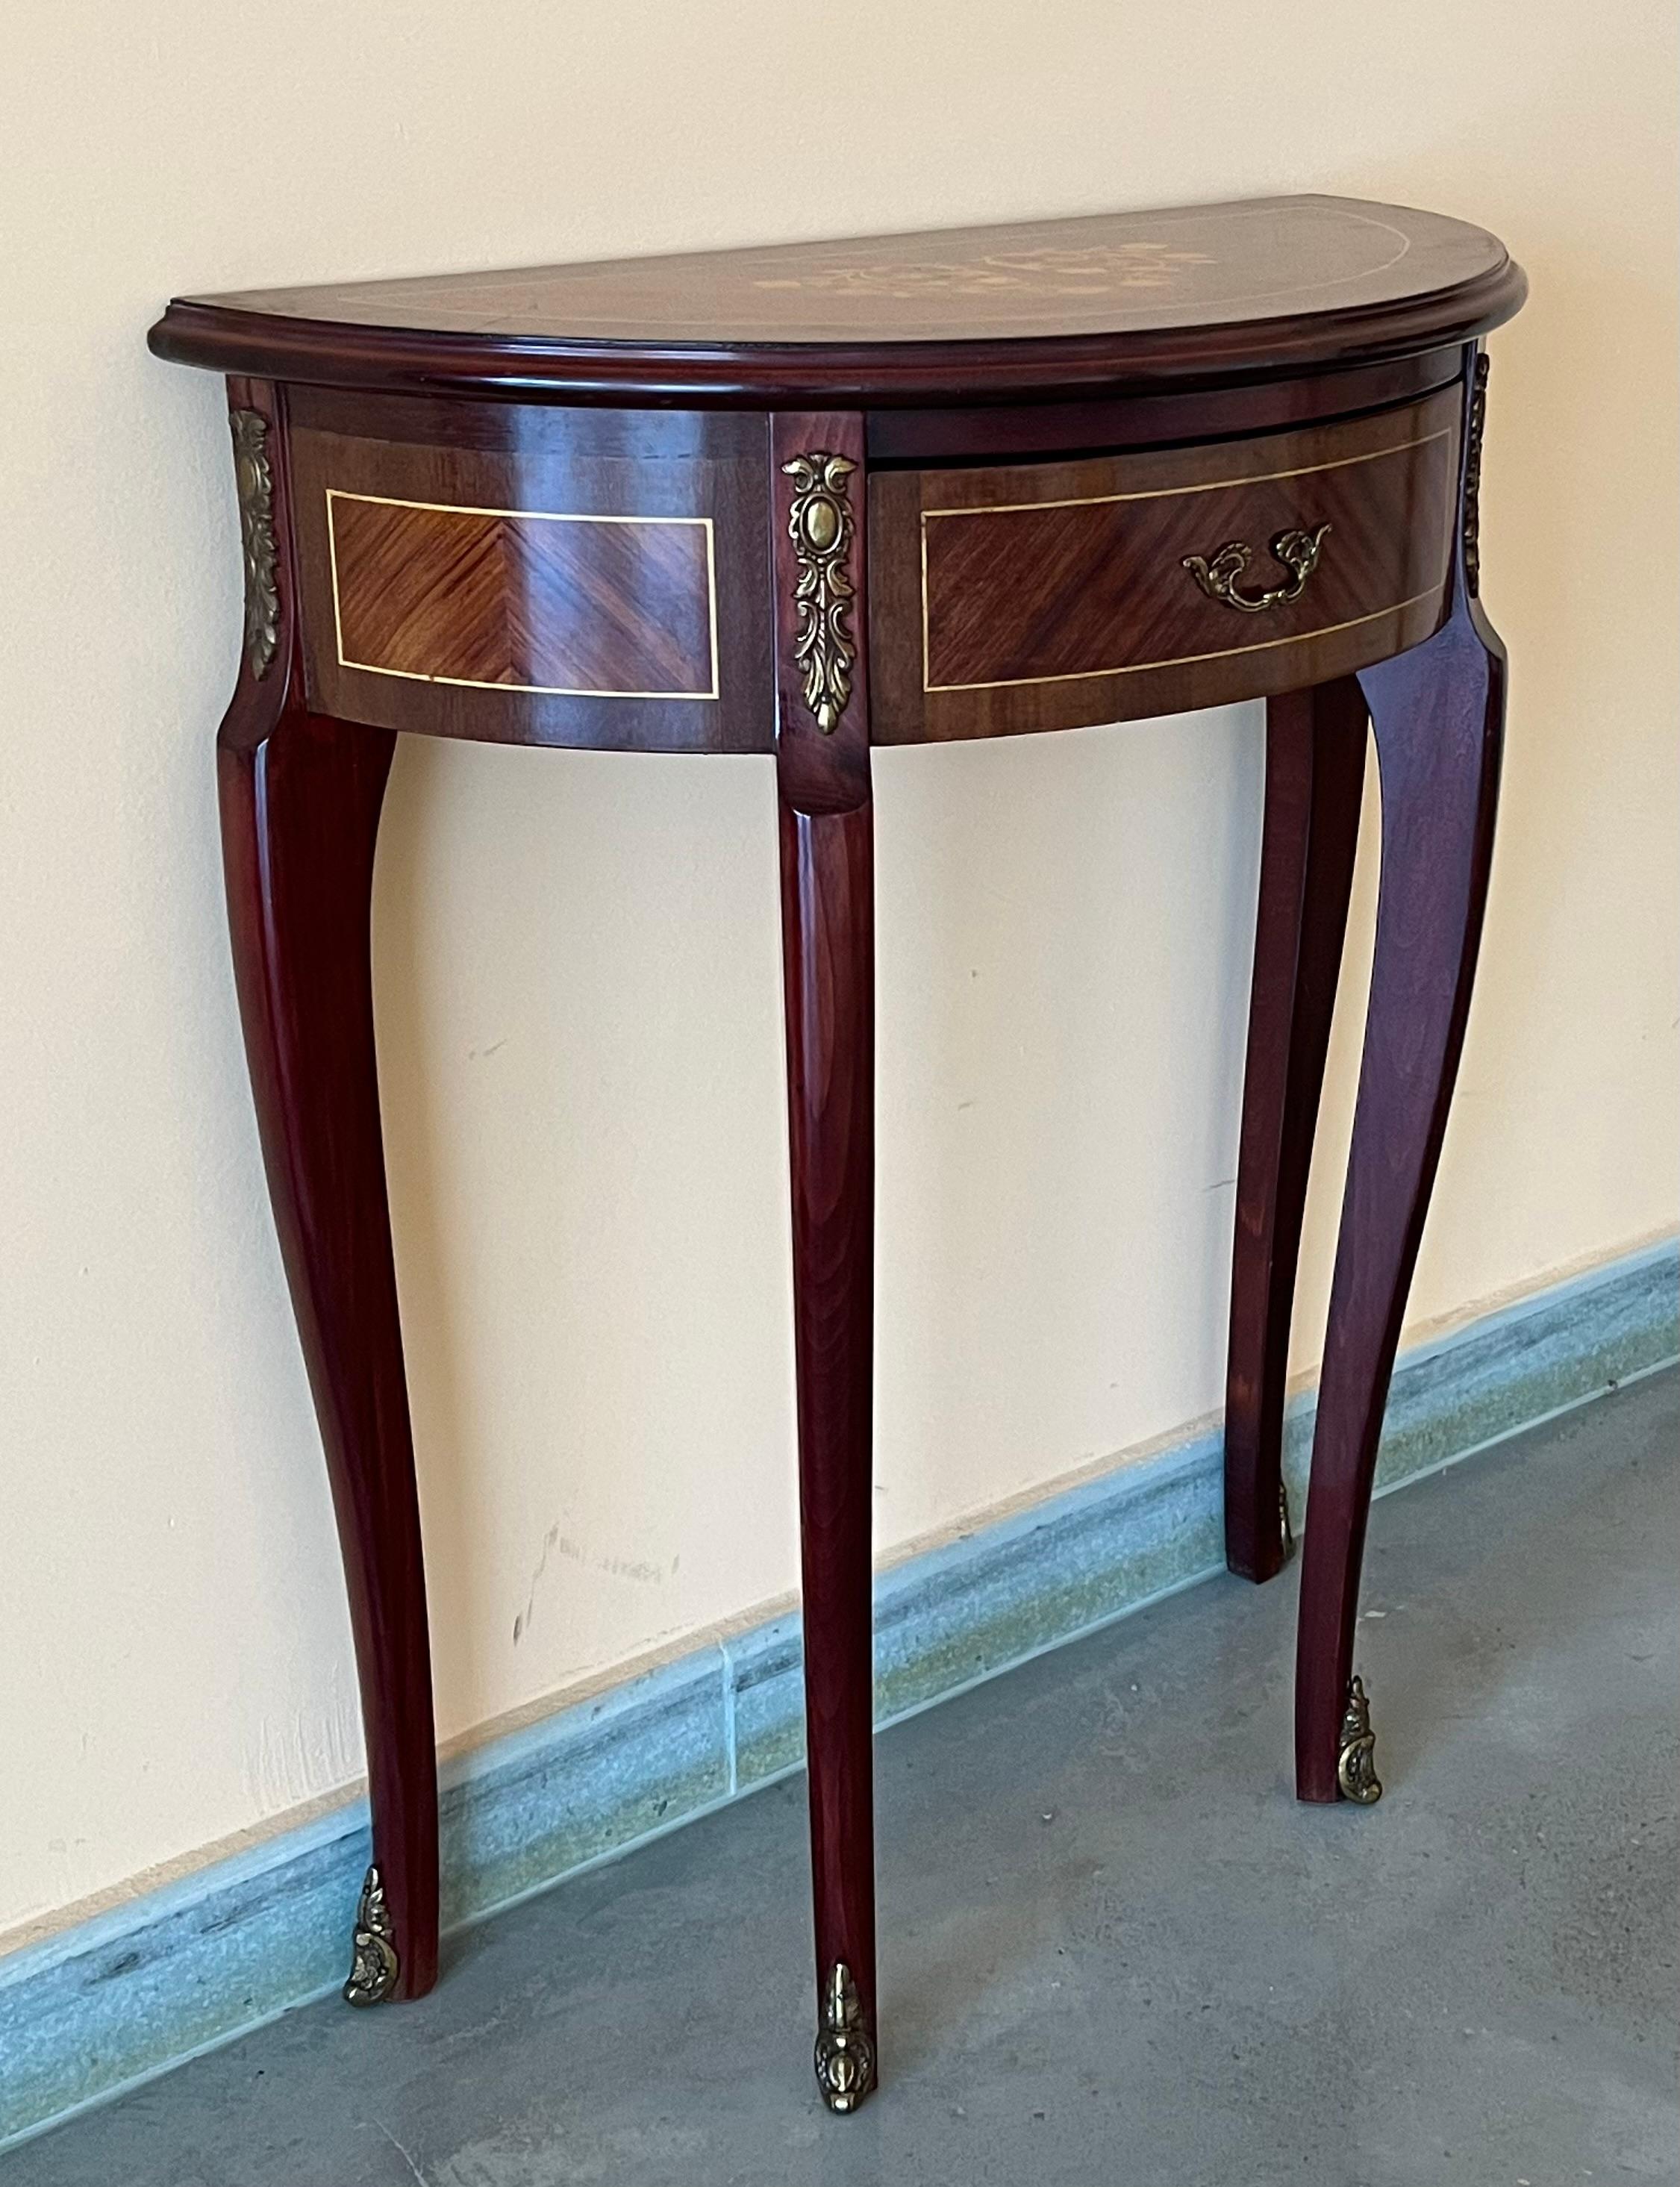 Elegant French inspired satinwood demilune console table with fine classical Floral marquetry inlay on the top, drawer and sides, raised on tapering legs with brass details.
You can use as nightstands, console, or side table.